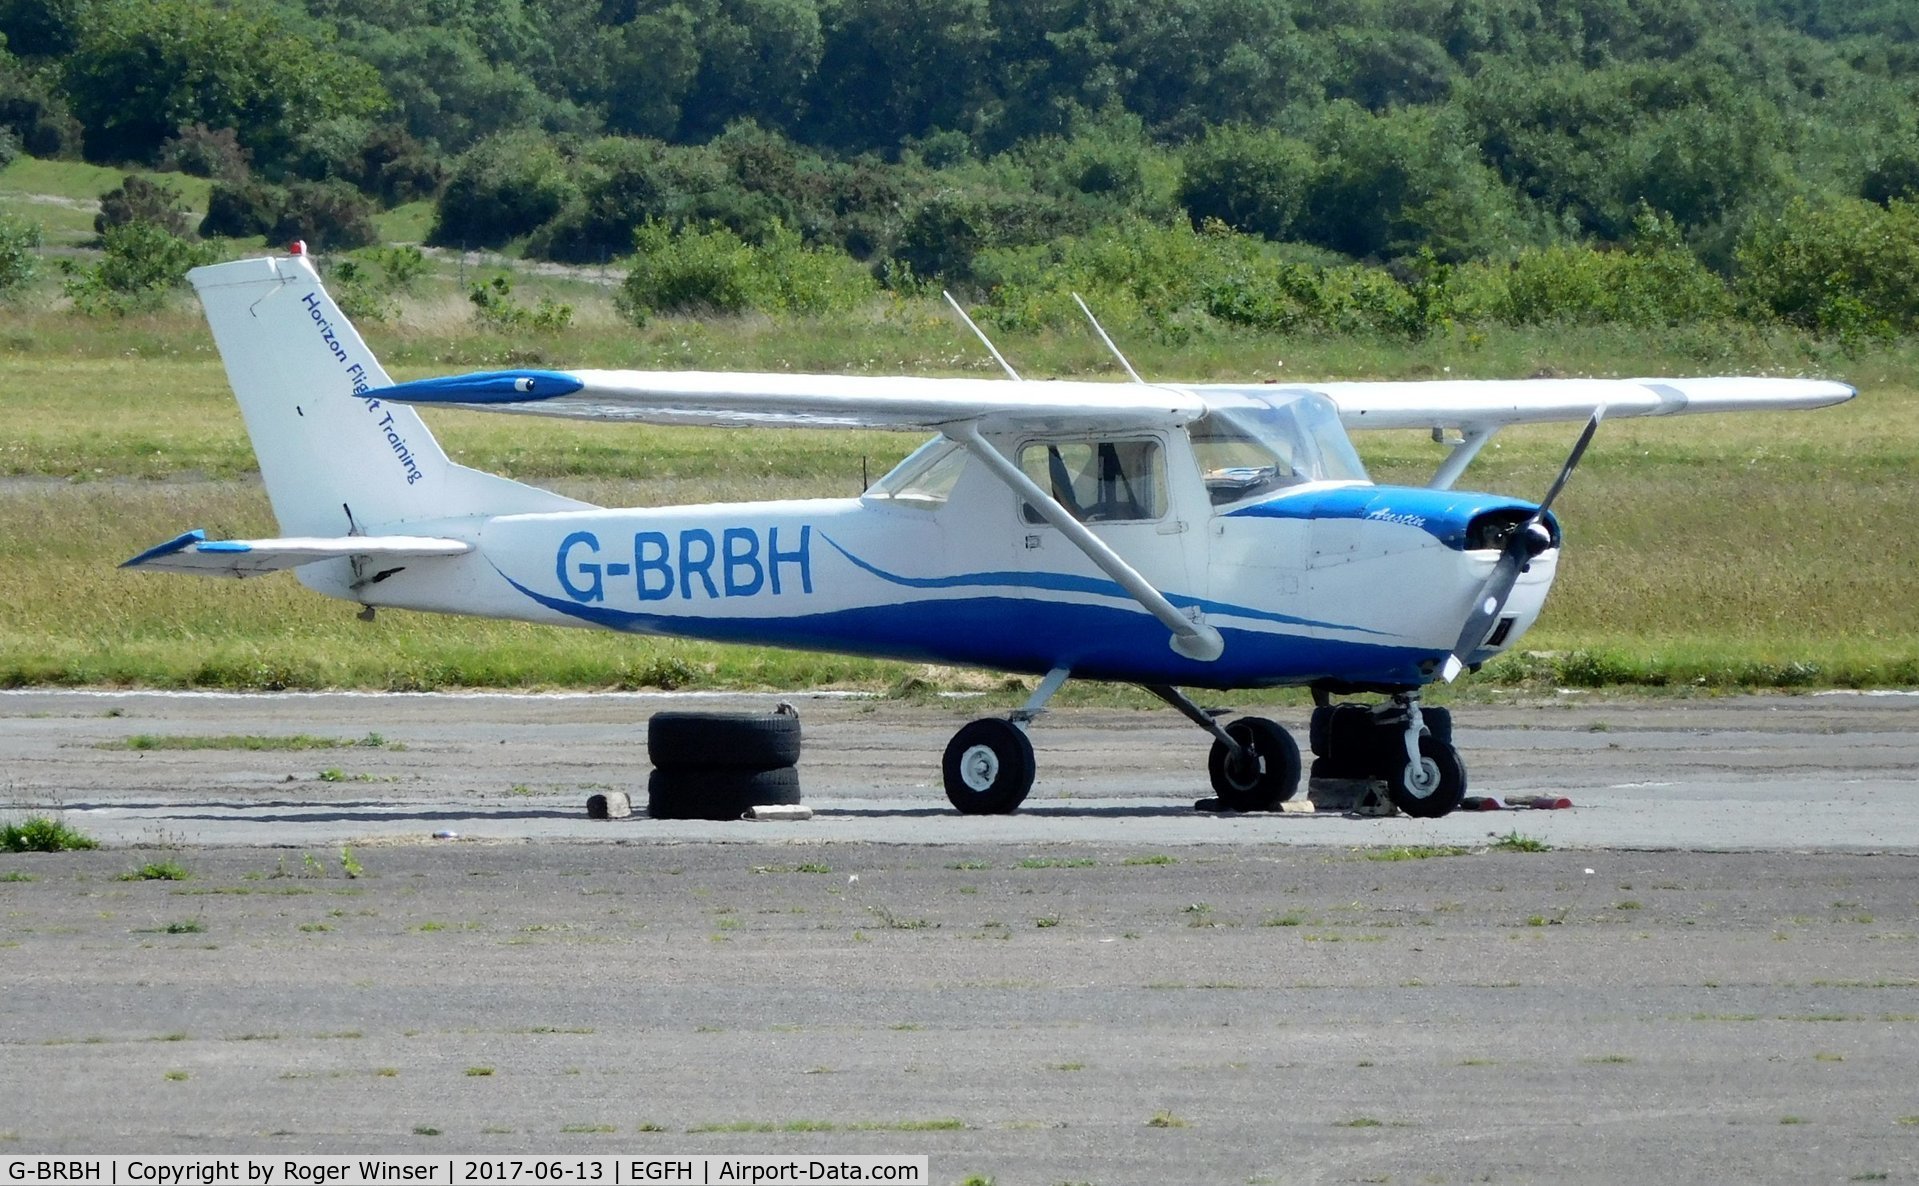 G-BRBH, 1968 Cessna 150H C/N 150-69283, Operated by Horizon Flight Training.